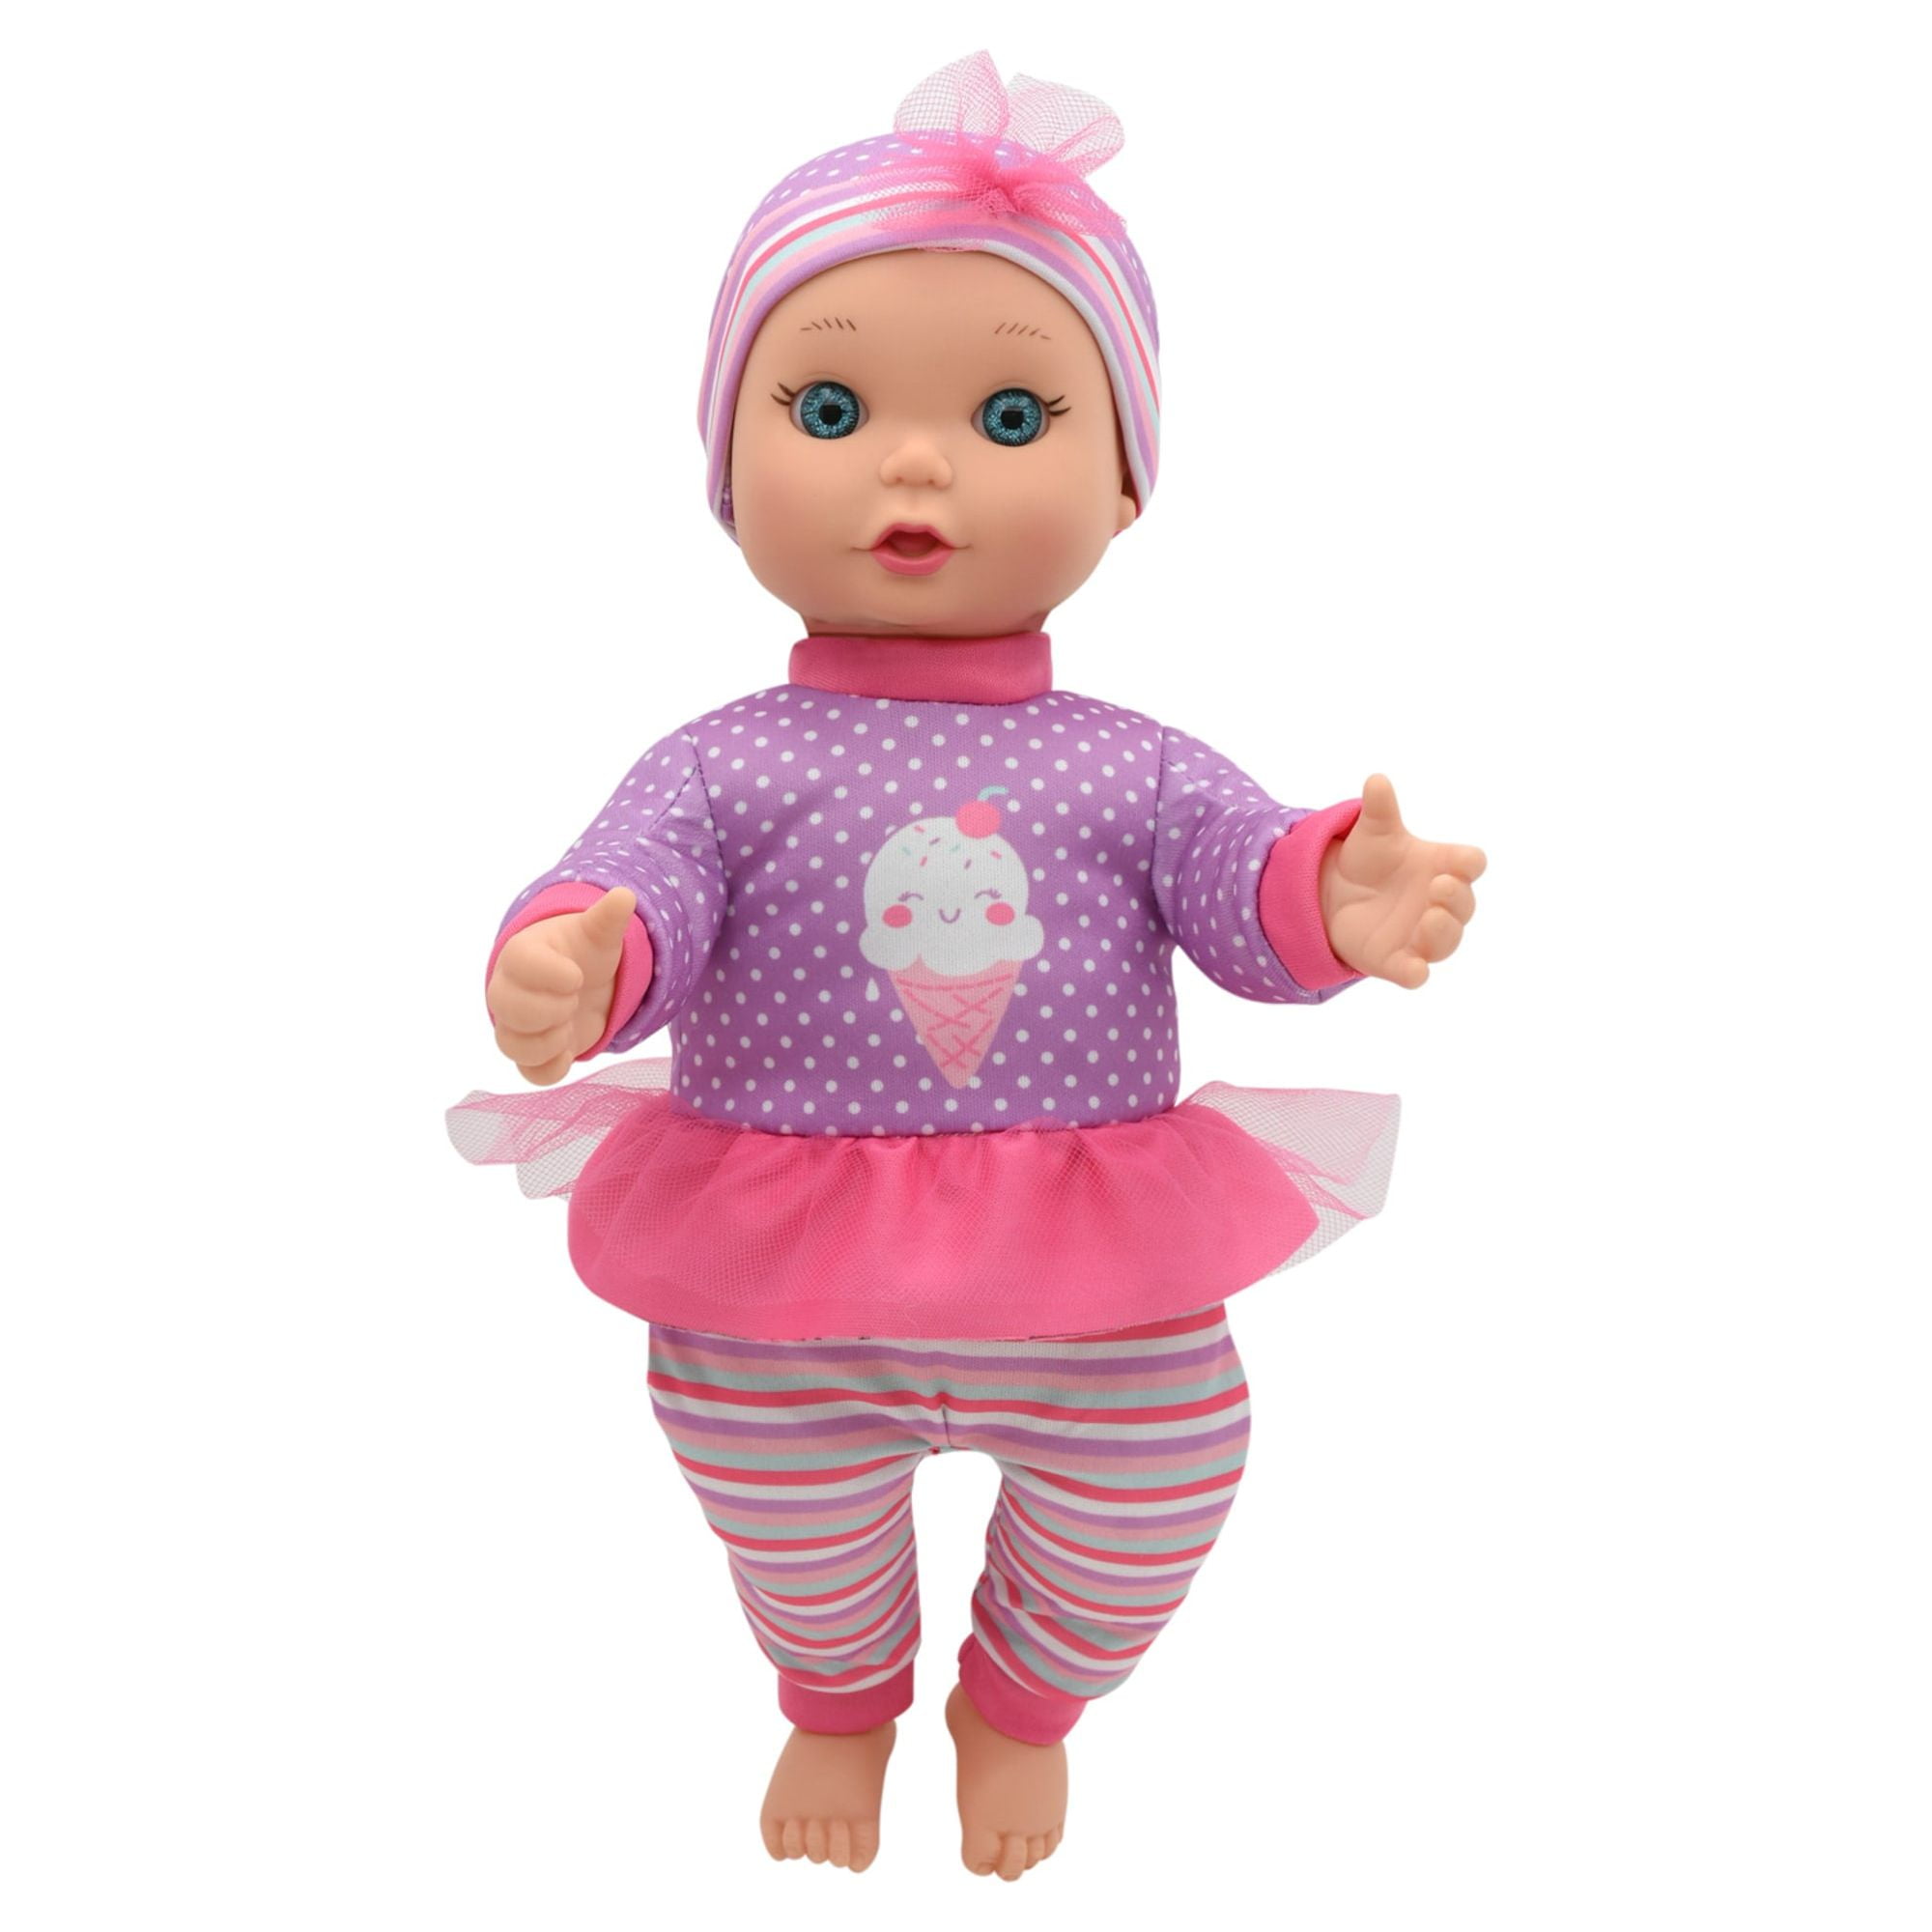 Pink Pajamas for 12-inch baby doll